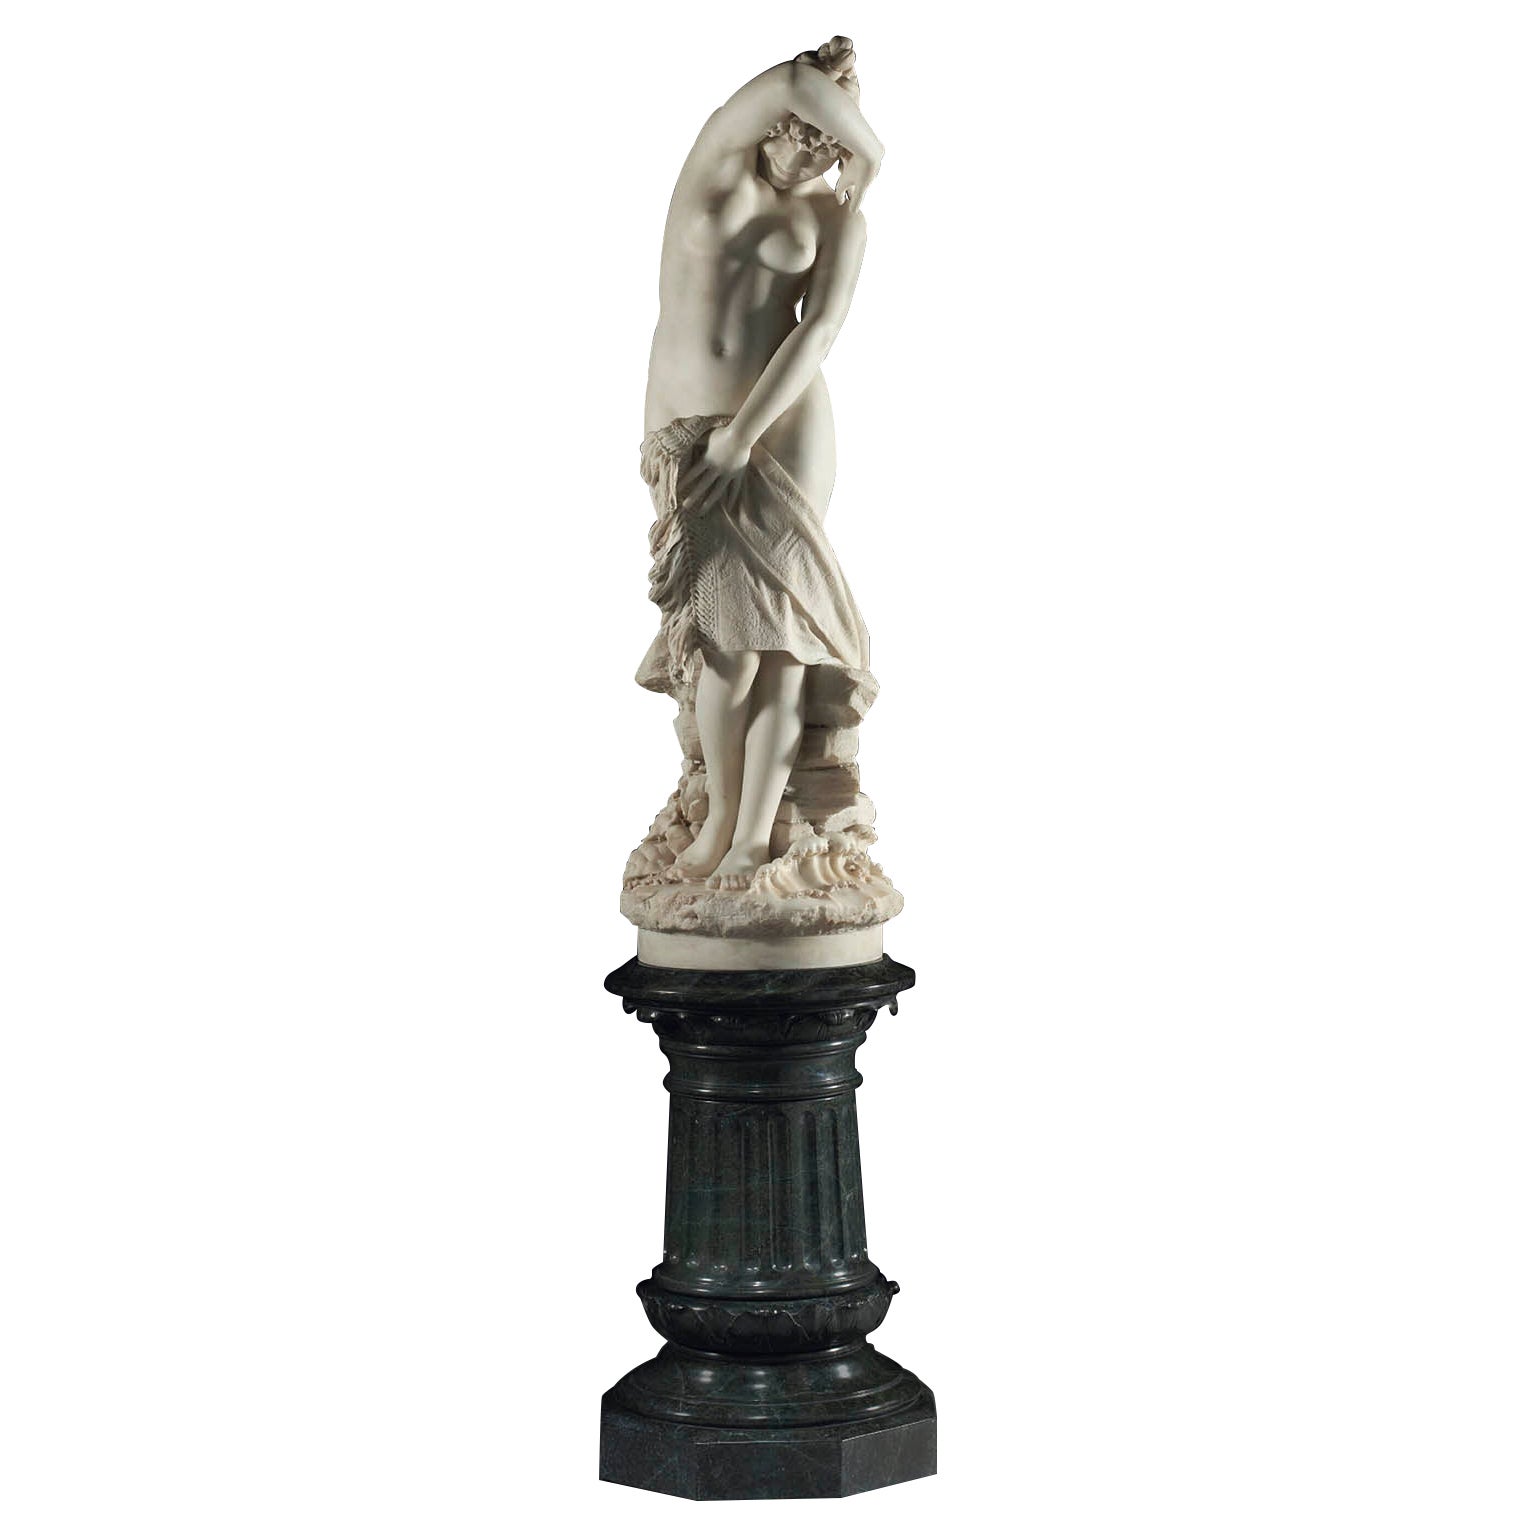 Pietro Bazzanti a Carved Marble Figure Semi-Nude Young Bather Girl For Sale